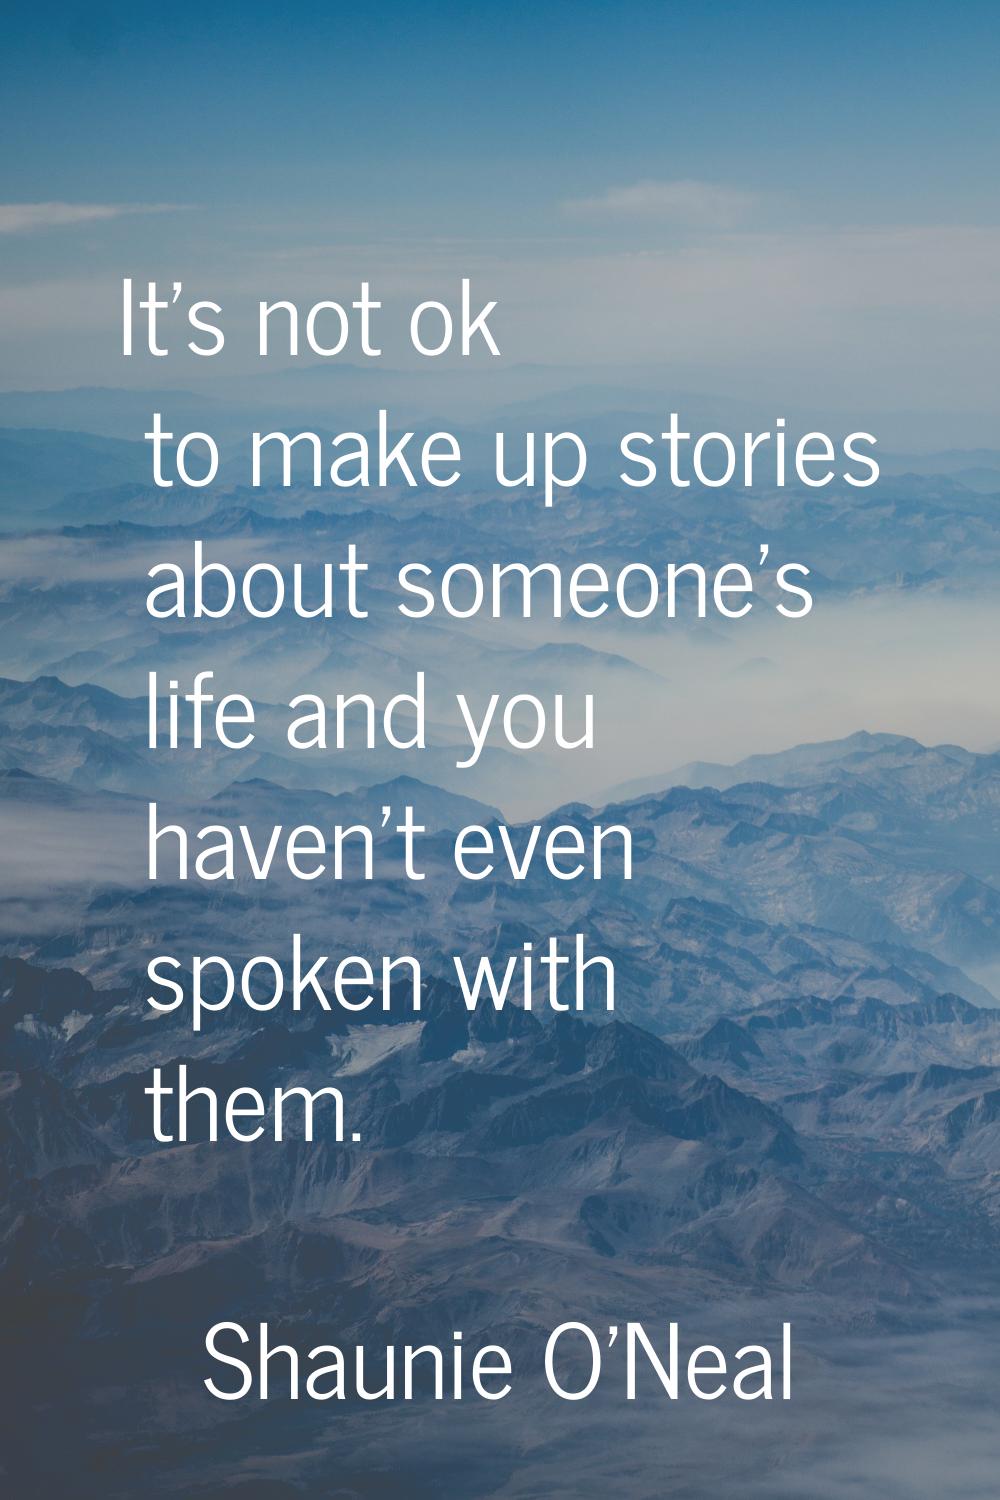 It's not ok to make up stories about someone's life and you haven't even spoken with them.